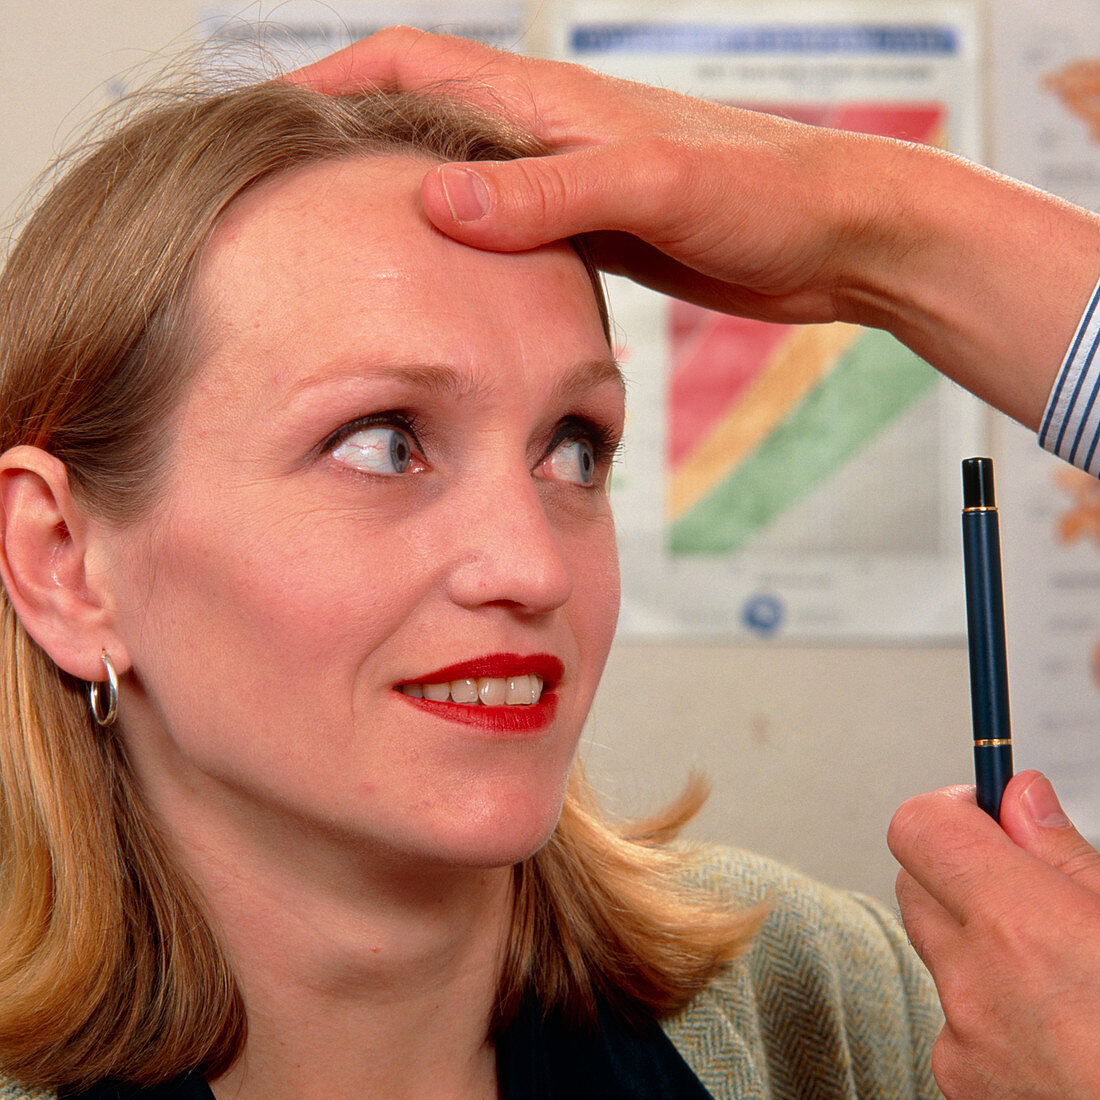 GP doctor examines the eyes of a woman